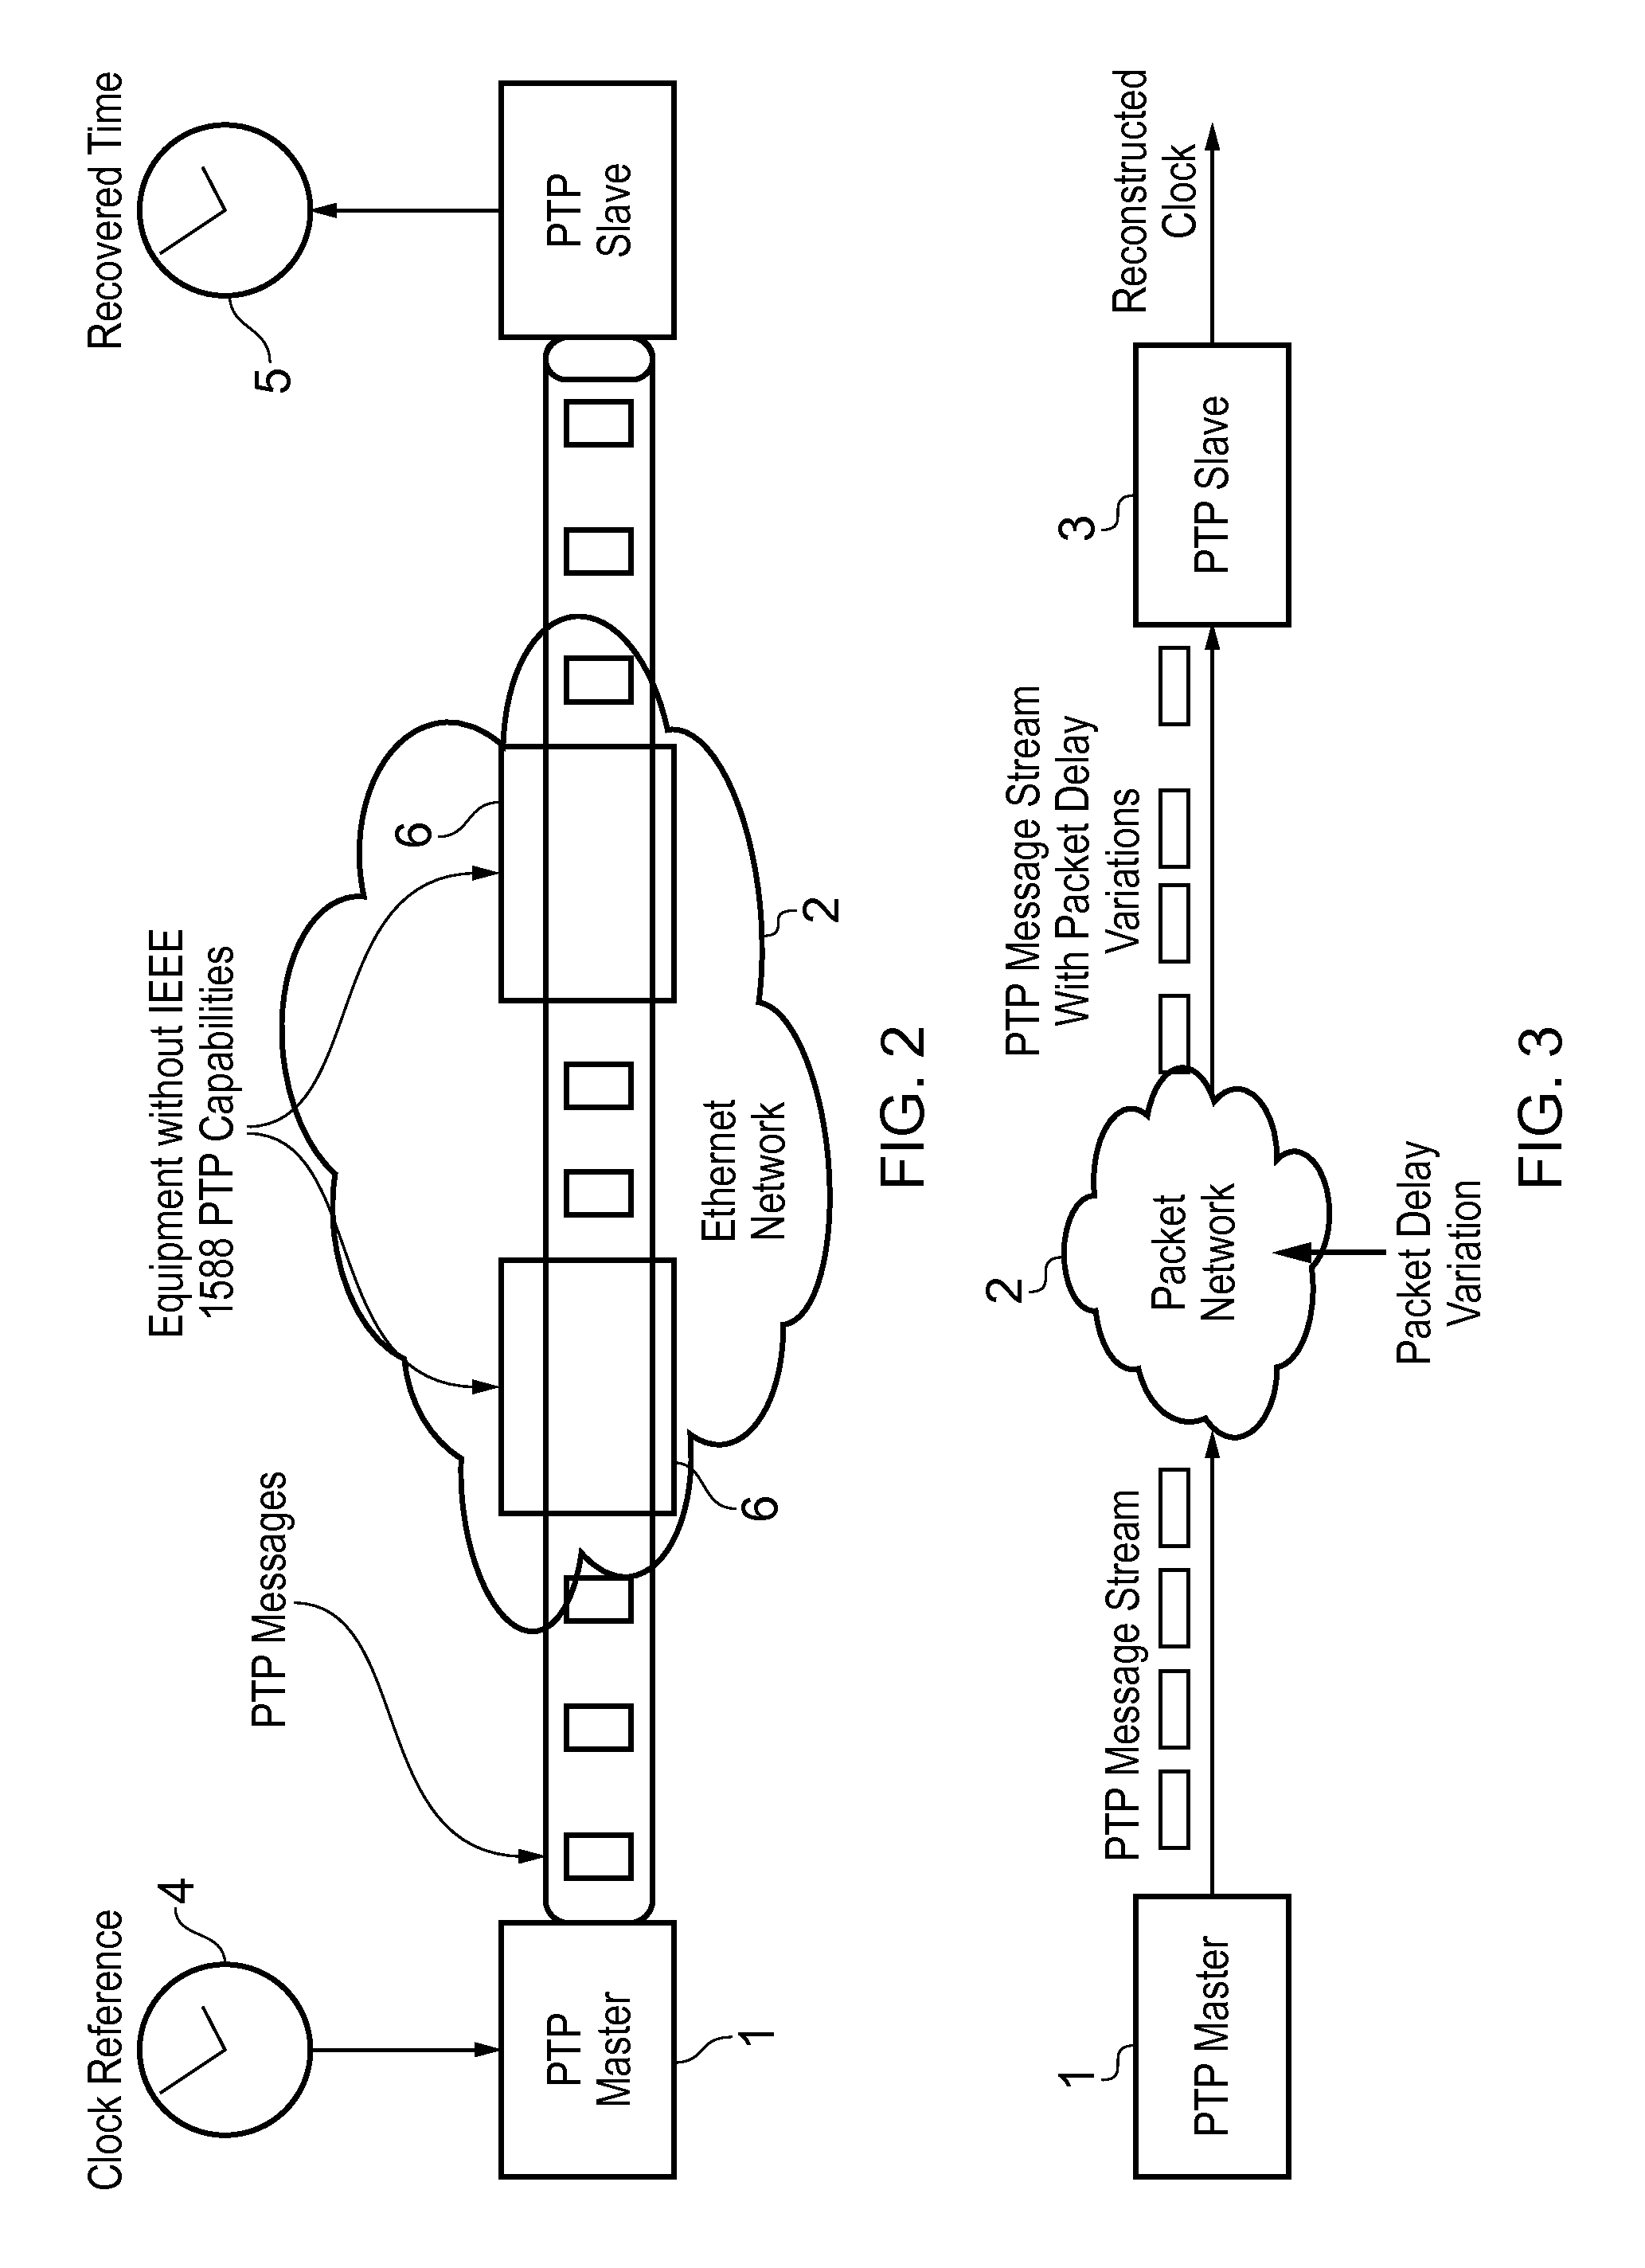 Method and devices for synchronization using linear programming